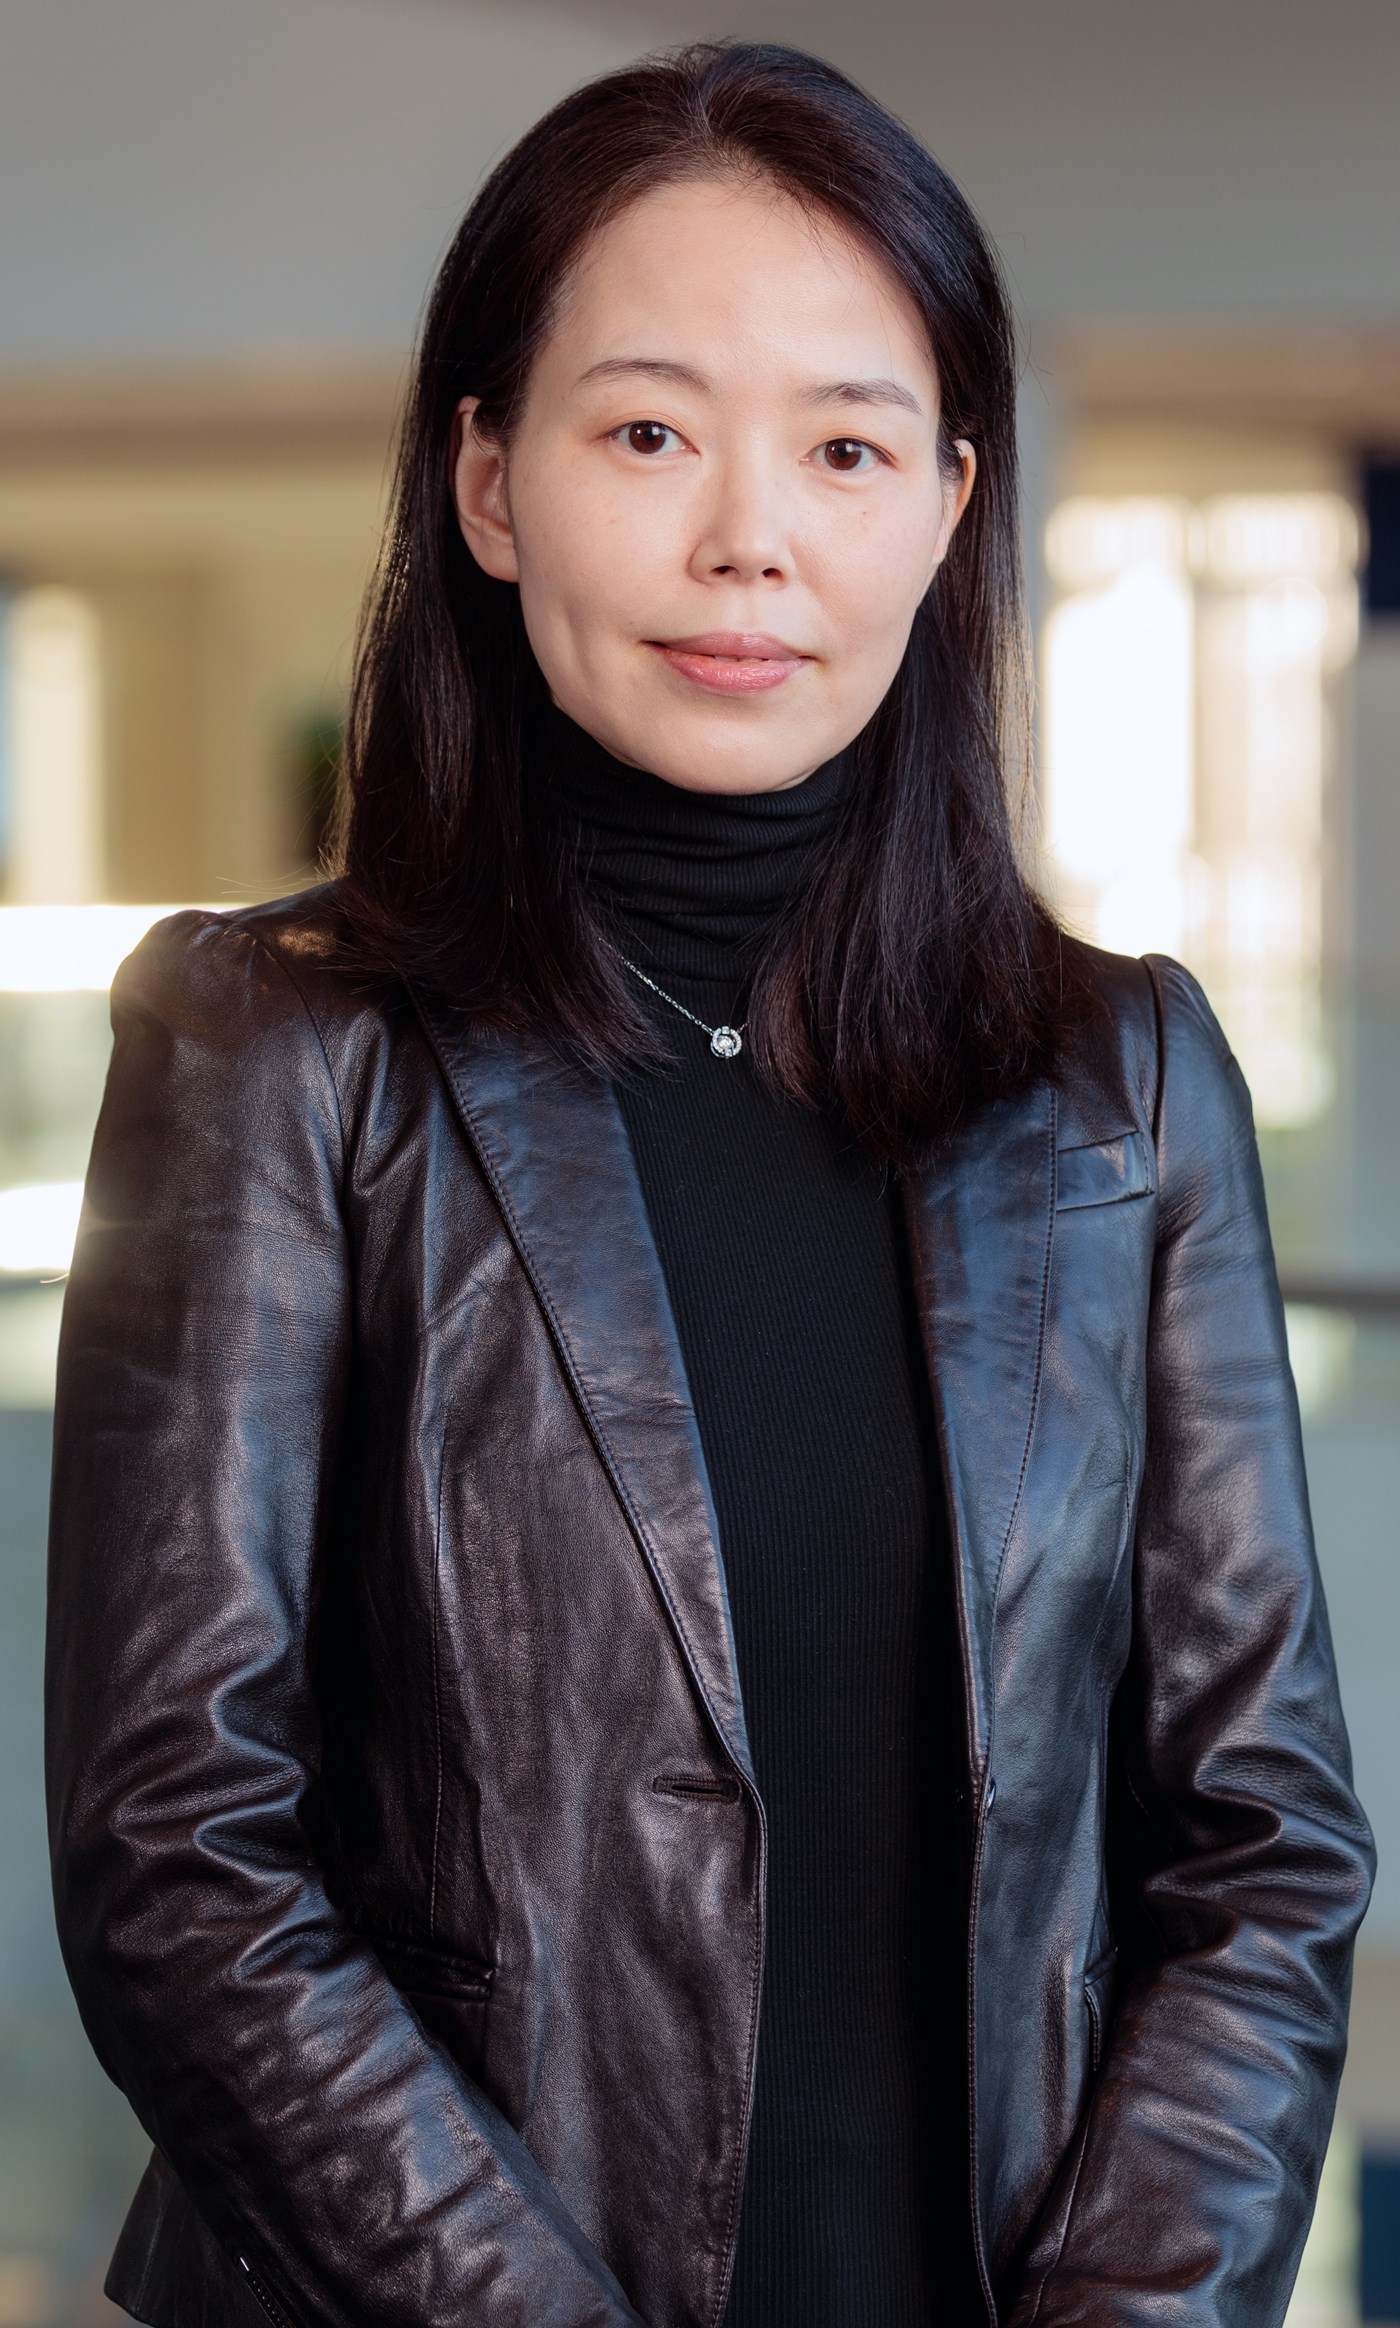 MinJeong Kim is an Associate Professor, Language Arts and Literacy in the School of Education at UMass Lowell.